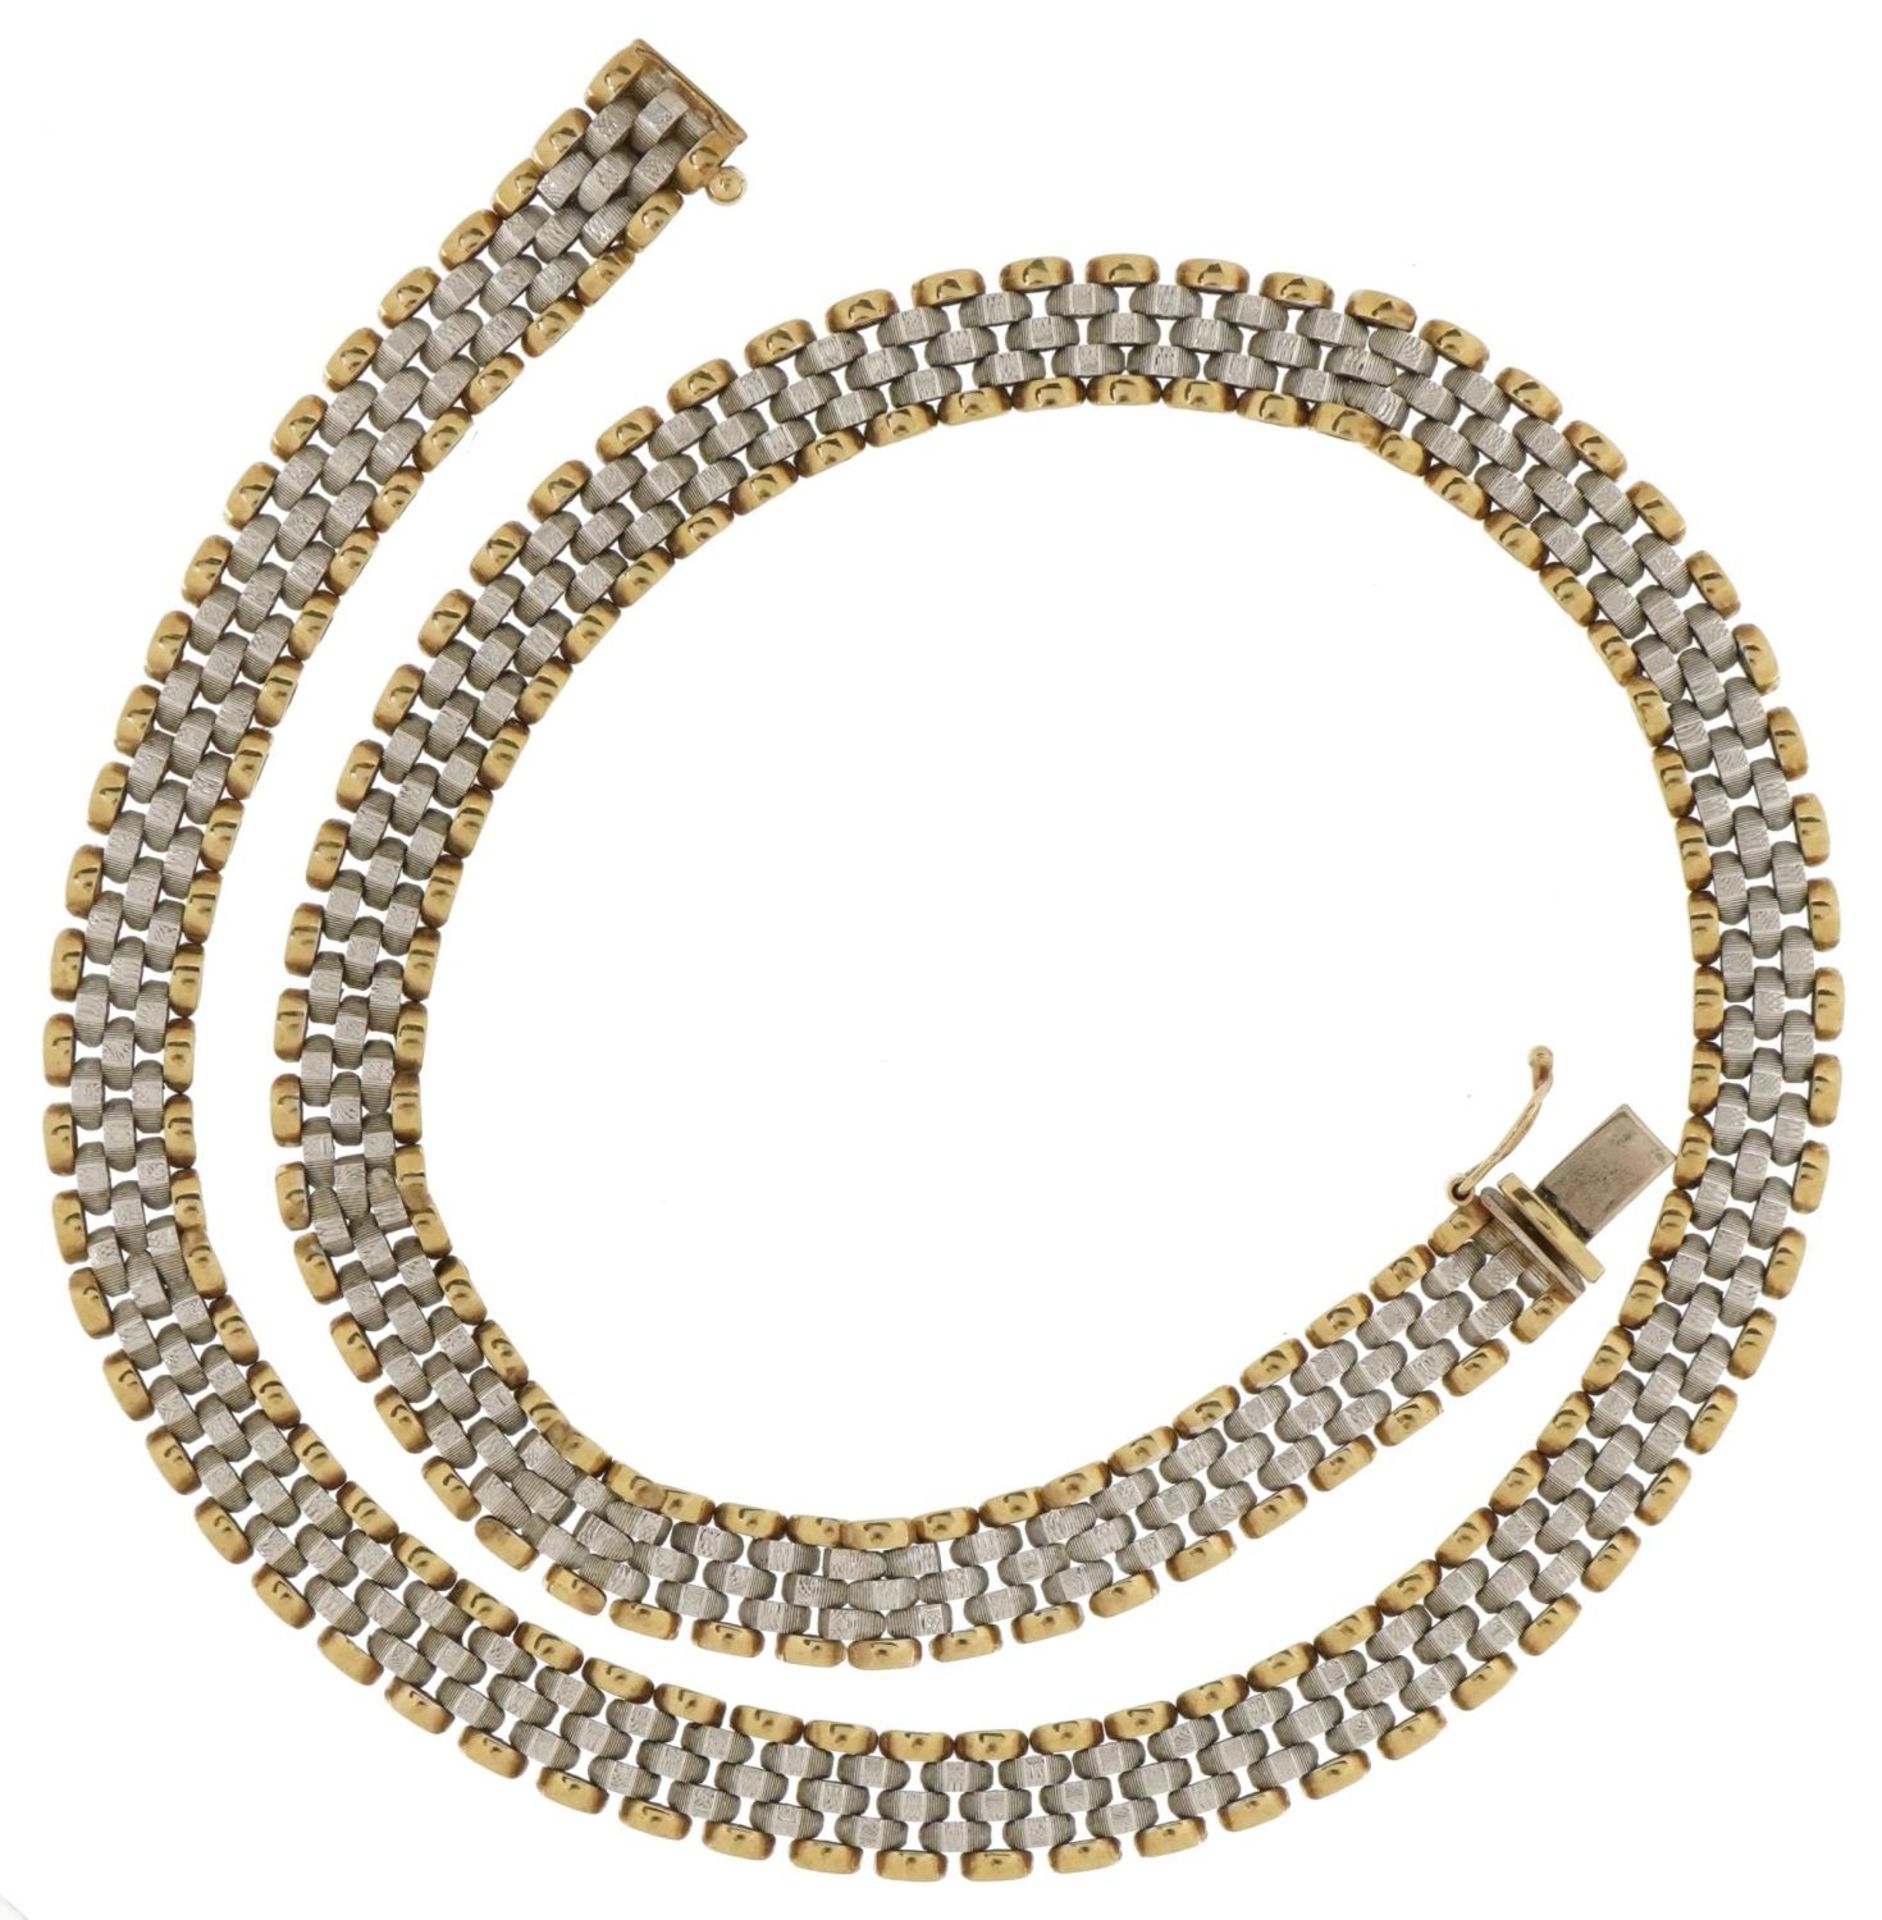 9ct two tone gold watch strap design necklace, 40cm in length, 25.5g : For further information on - Image 2 of 4